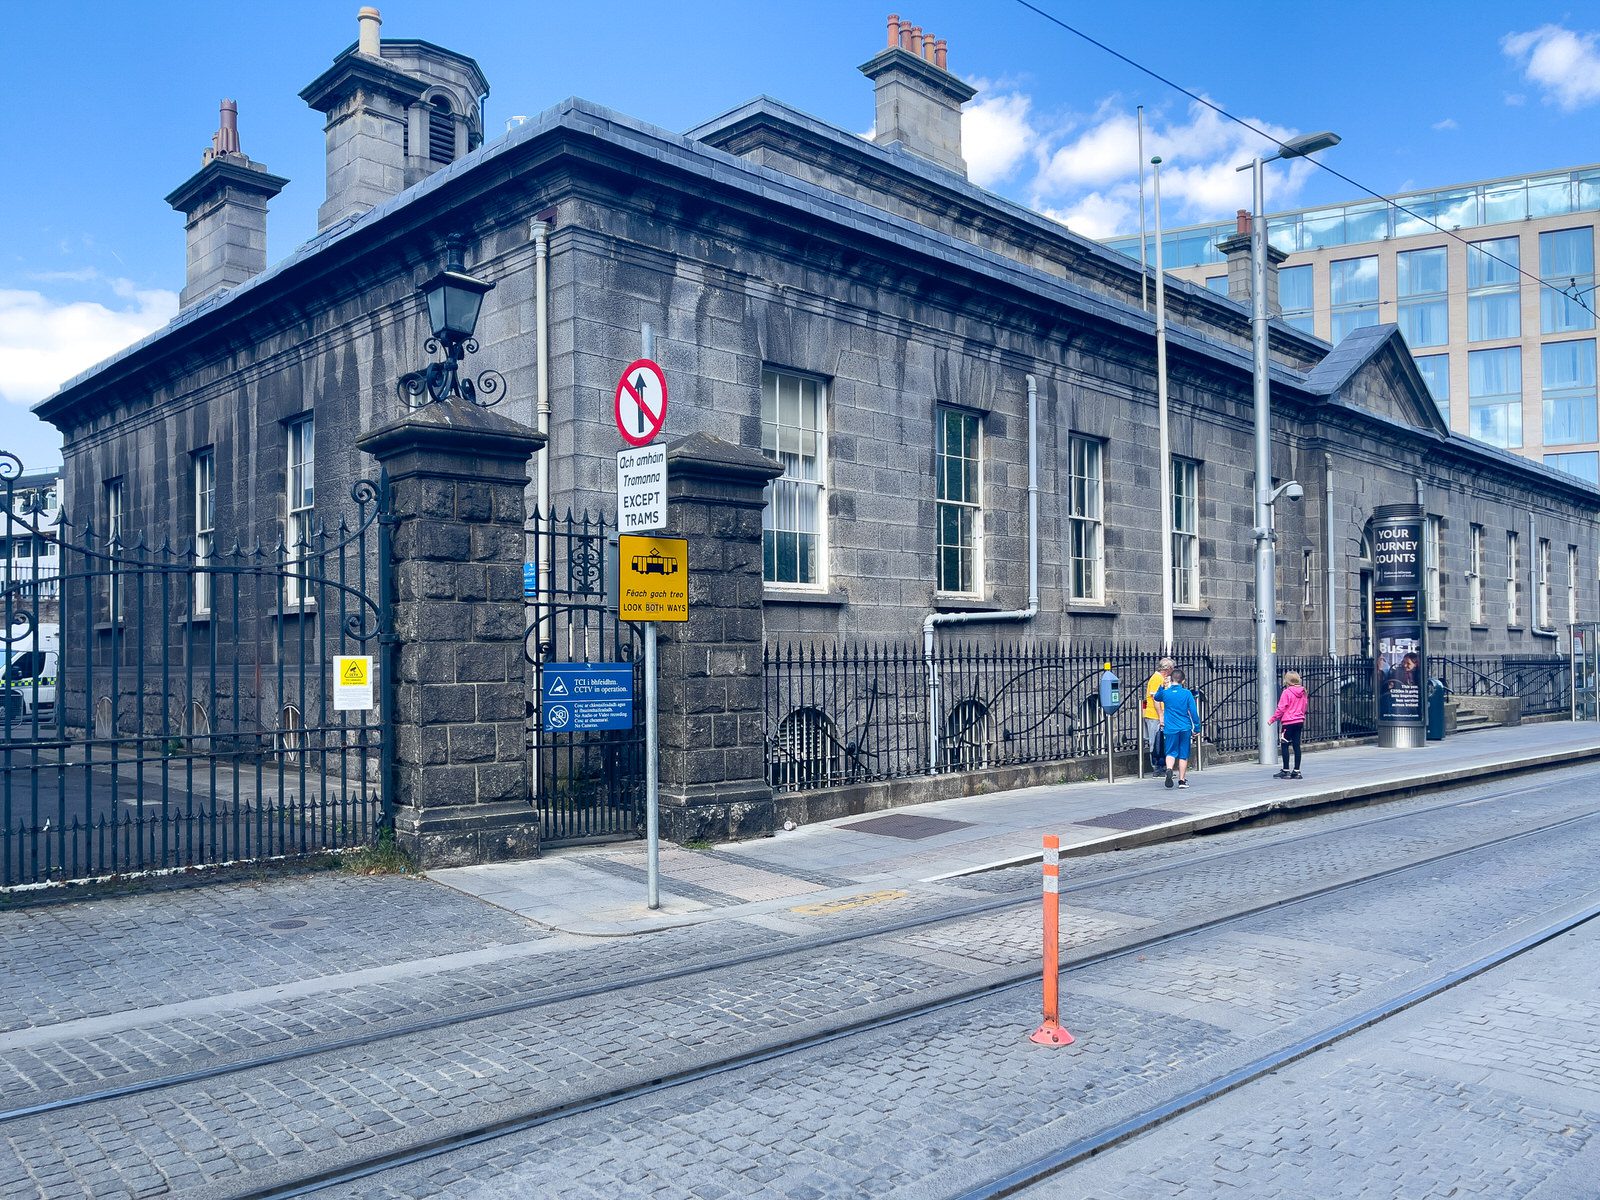 THE LUAS FOUR COURTS TRAM STOP [THERE IS MUCH TO BE SEEN HERE]-234116-1